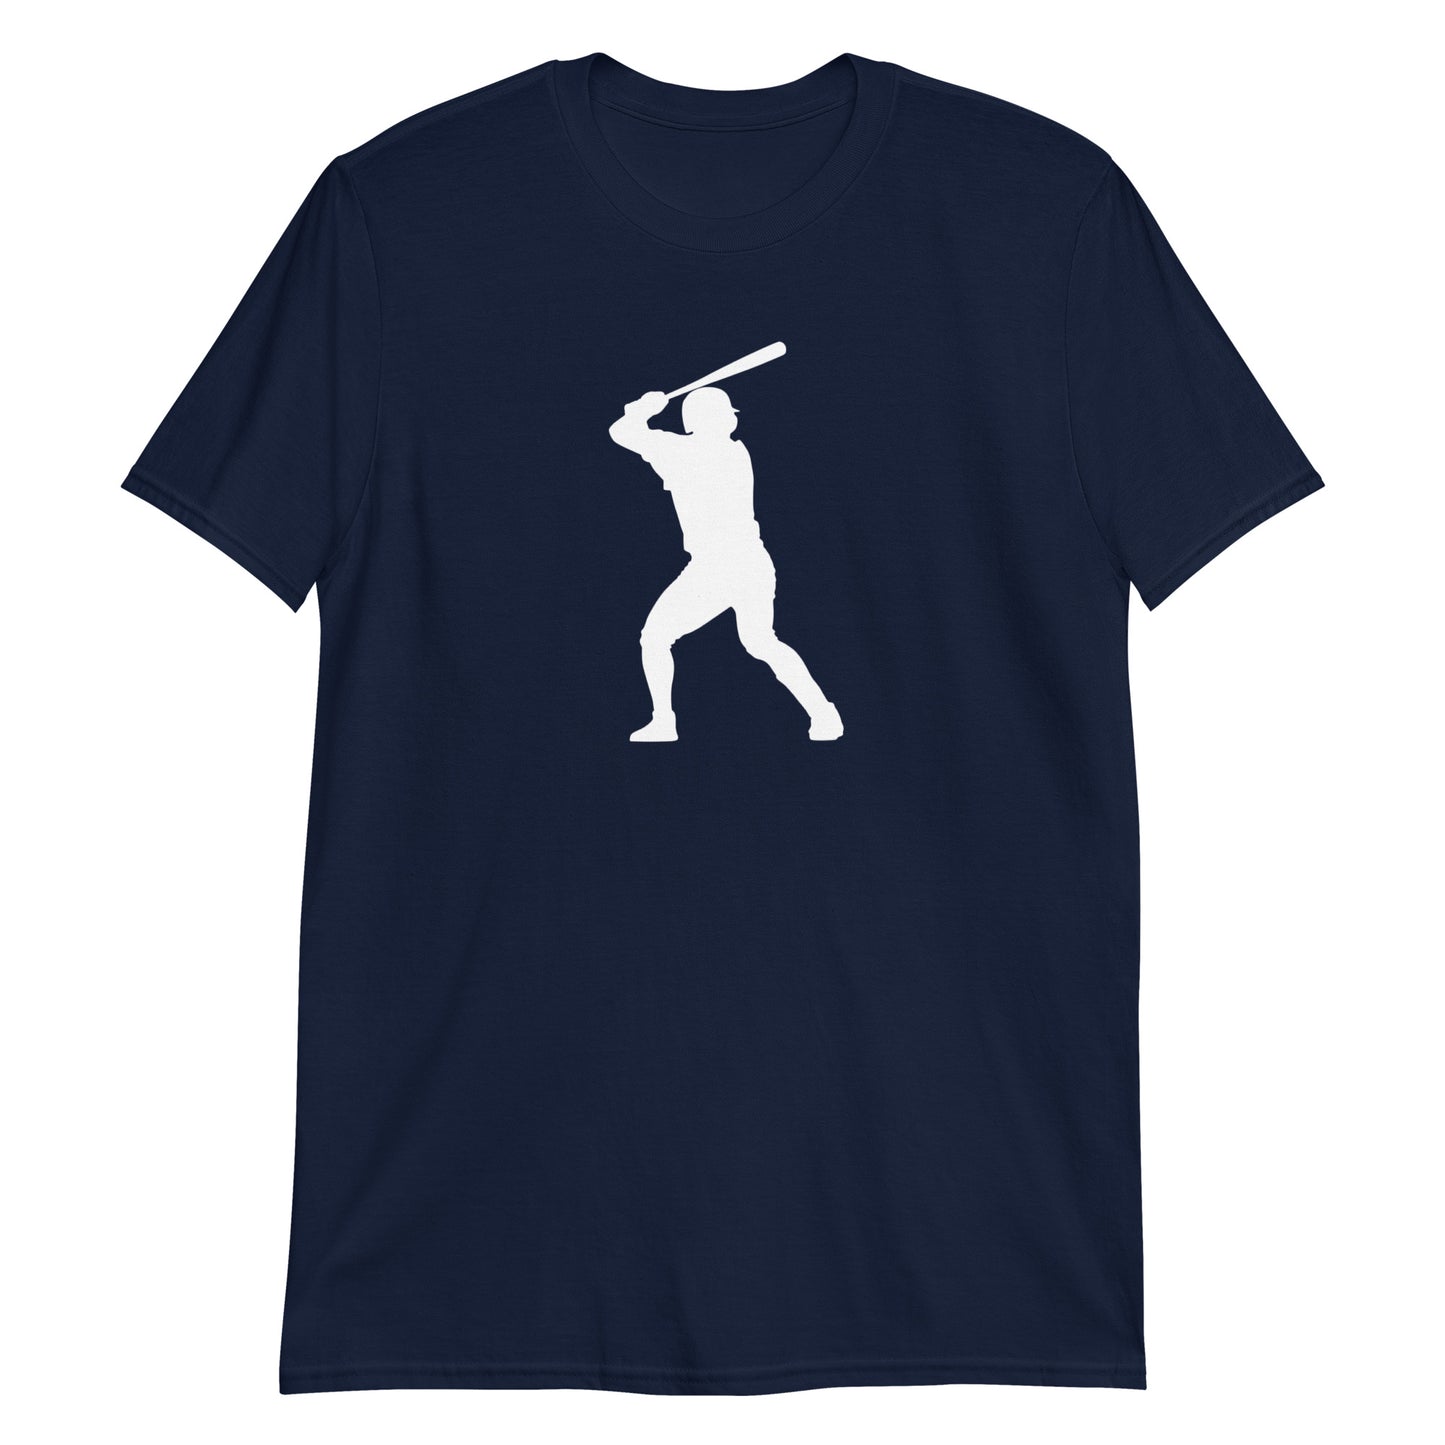 Anthony Volpe Yankees Jersey, Anthony Volpe Gear and Apparel